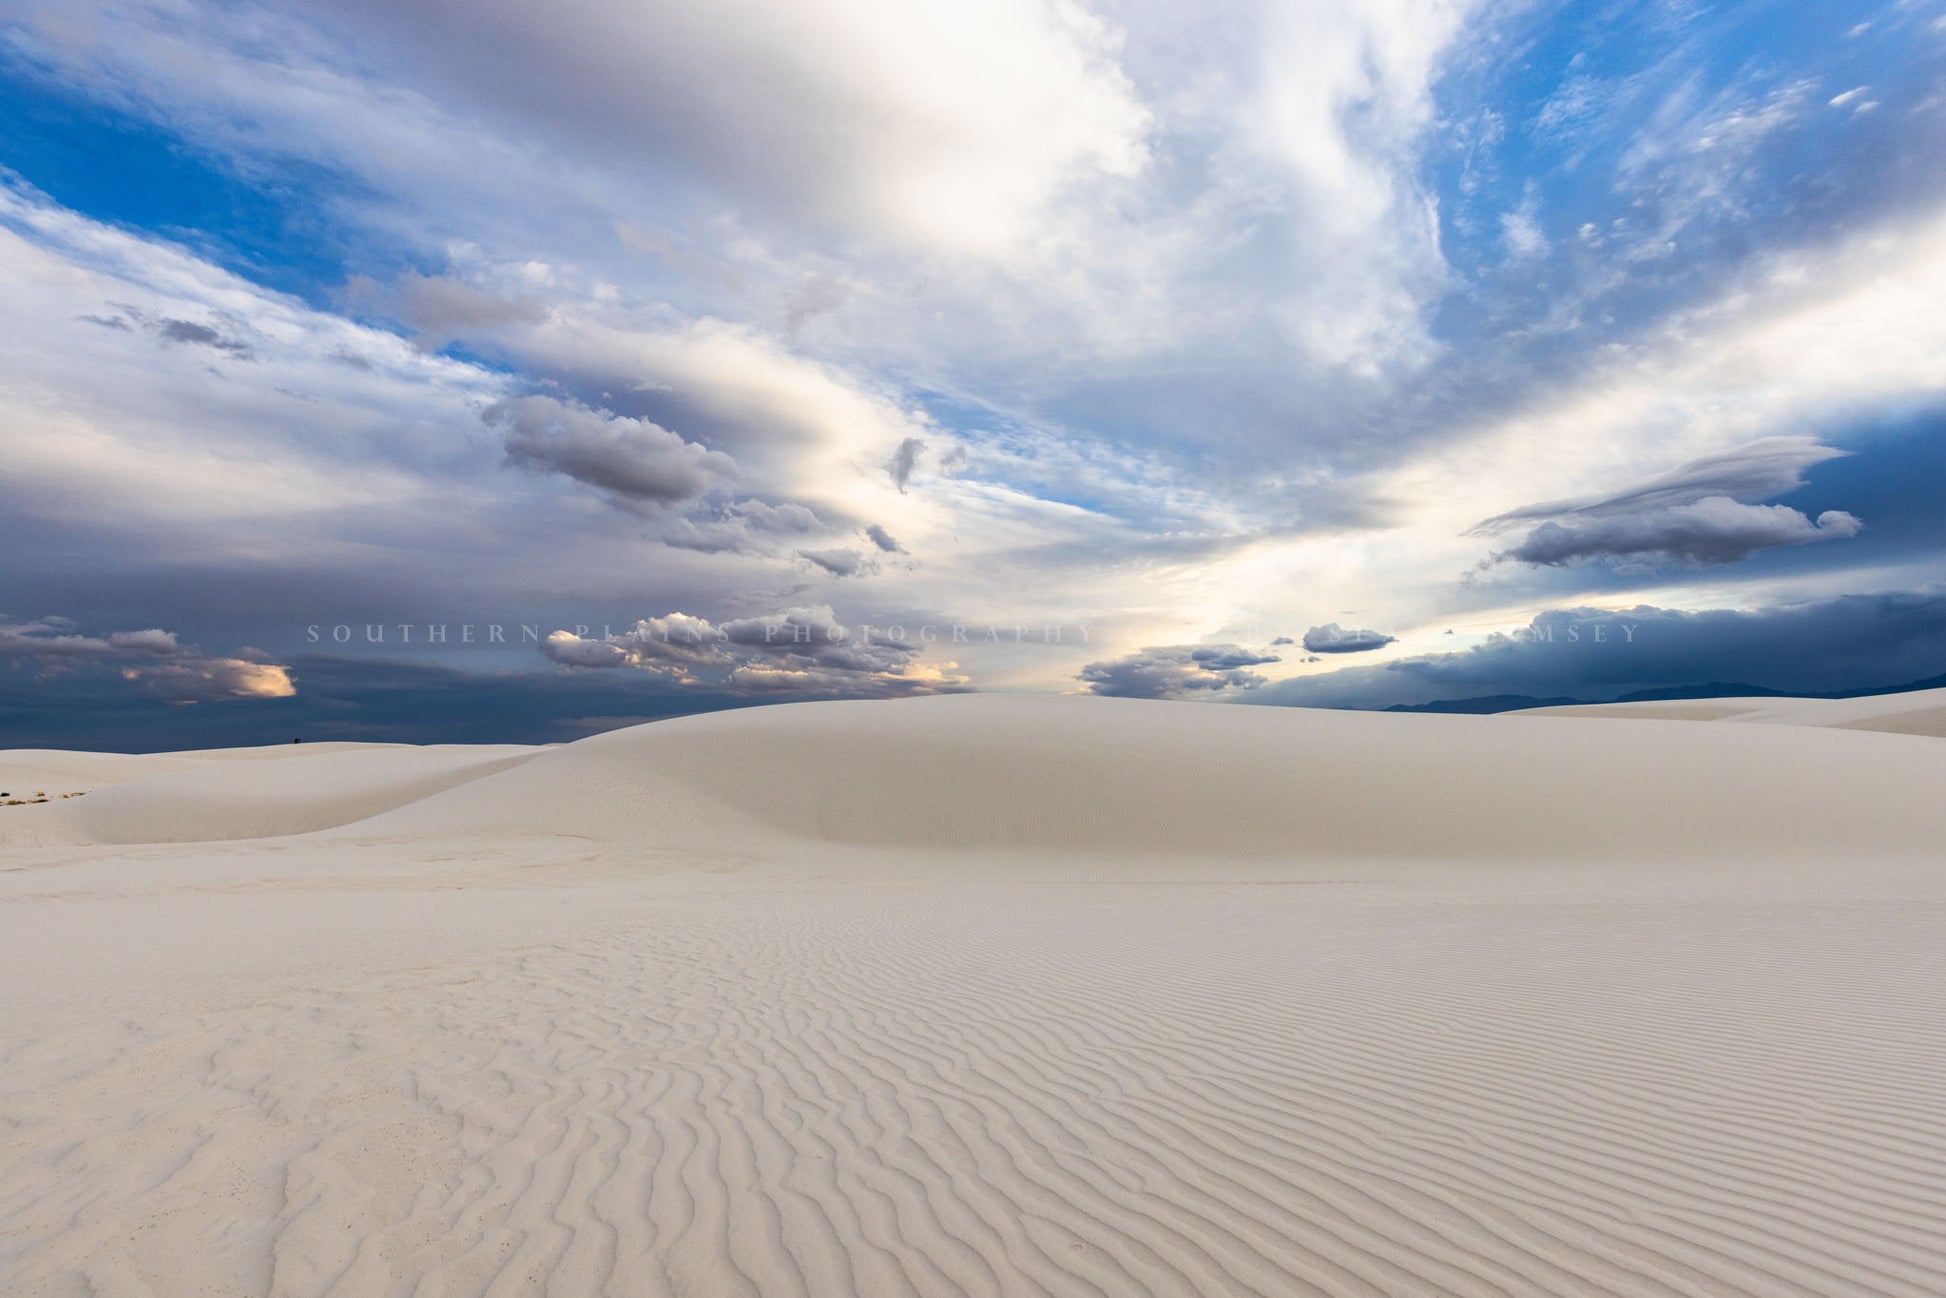 Desert photography print of a scenic sky over a sand dune on a spring evening at White Sands National Park, New Mexico by Sean Ramsey of Southern Plains Photography.